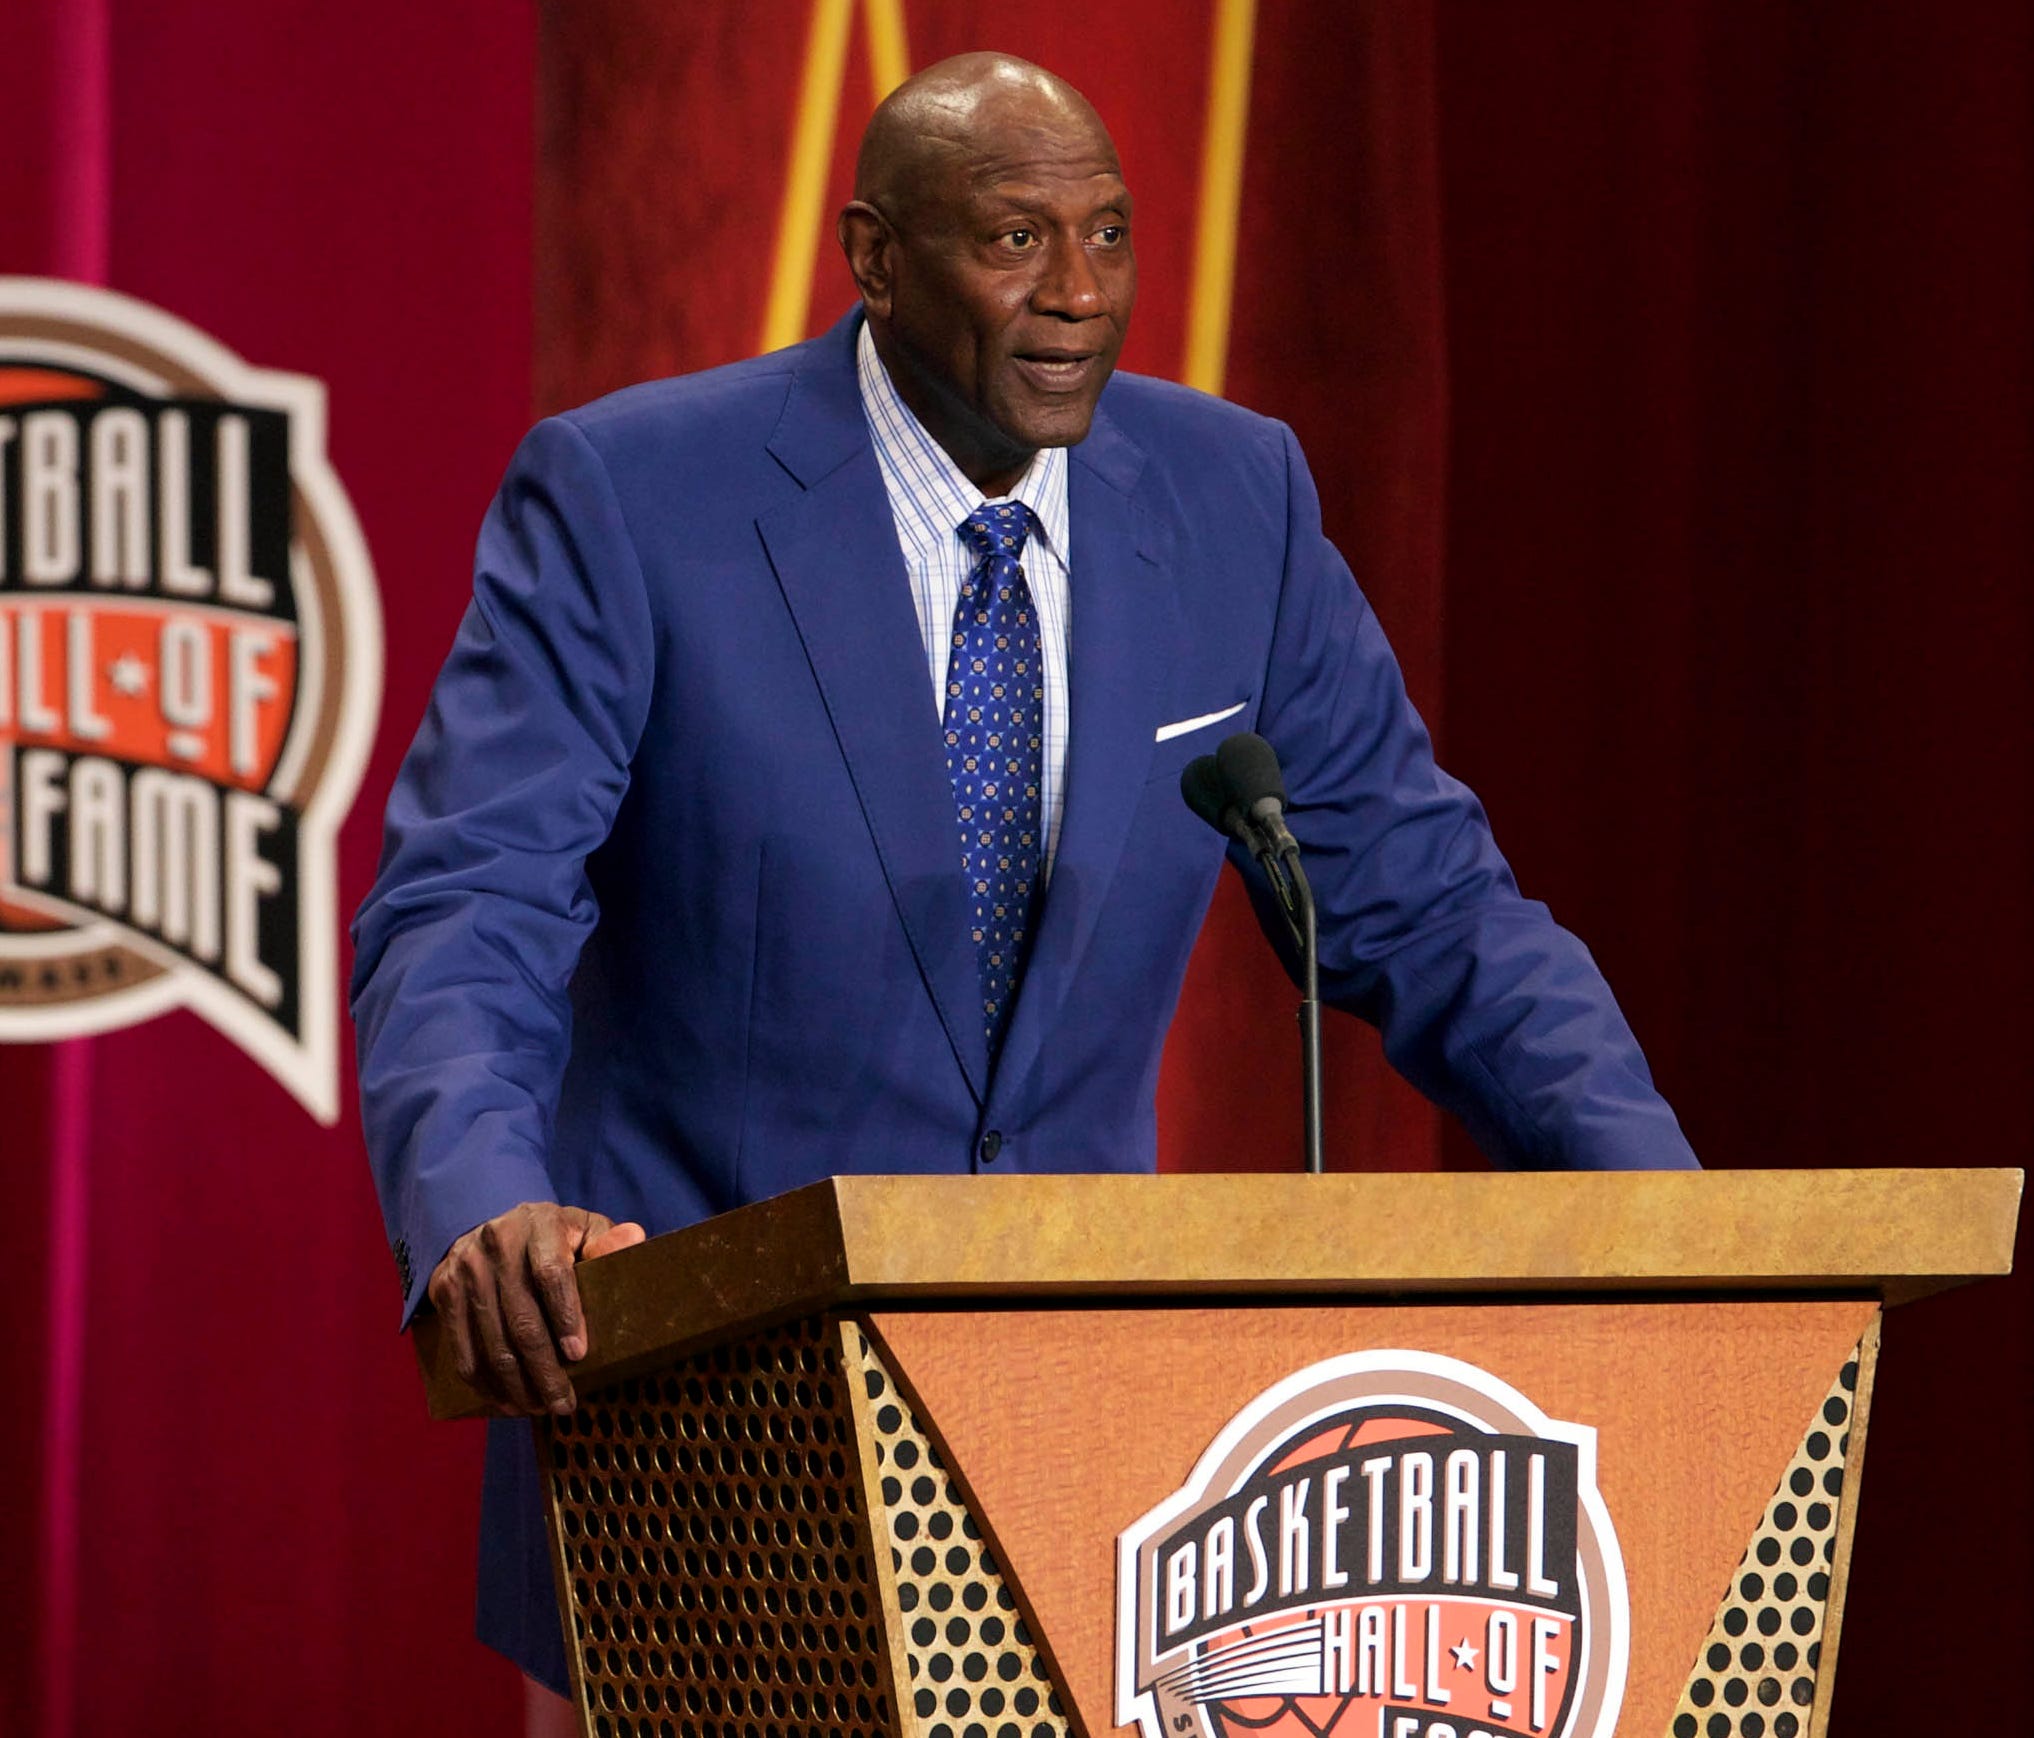 Spencer Haywood was a four-time NBA All-Star and two-time All-NBA First Team member.